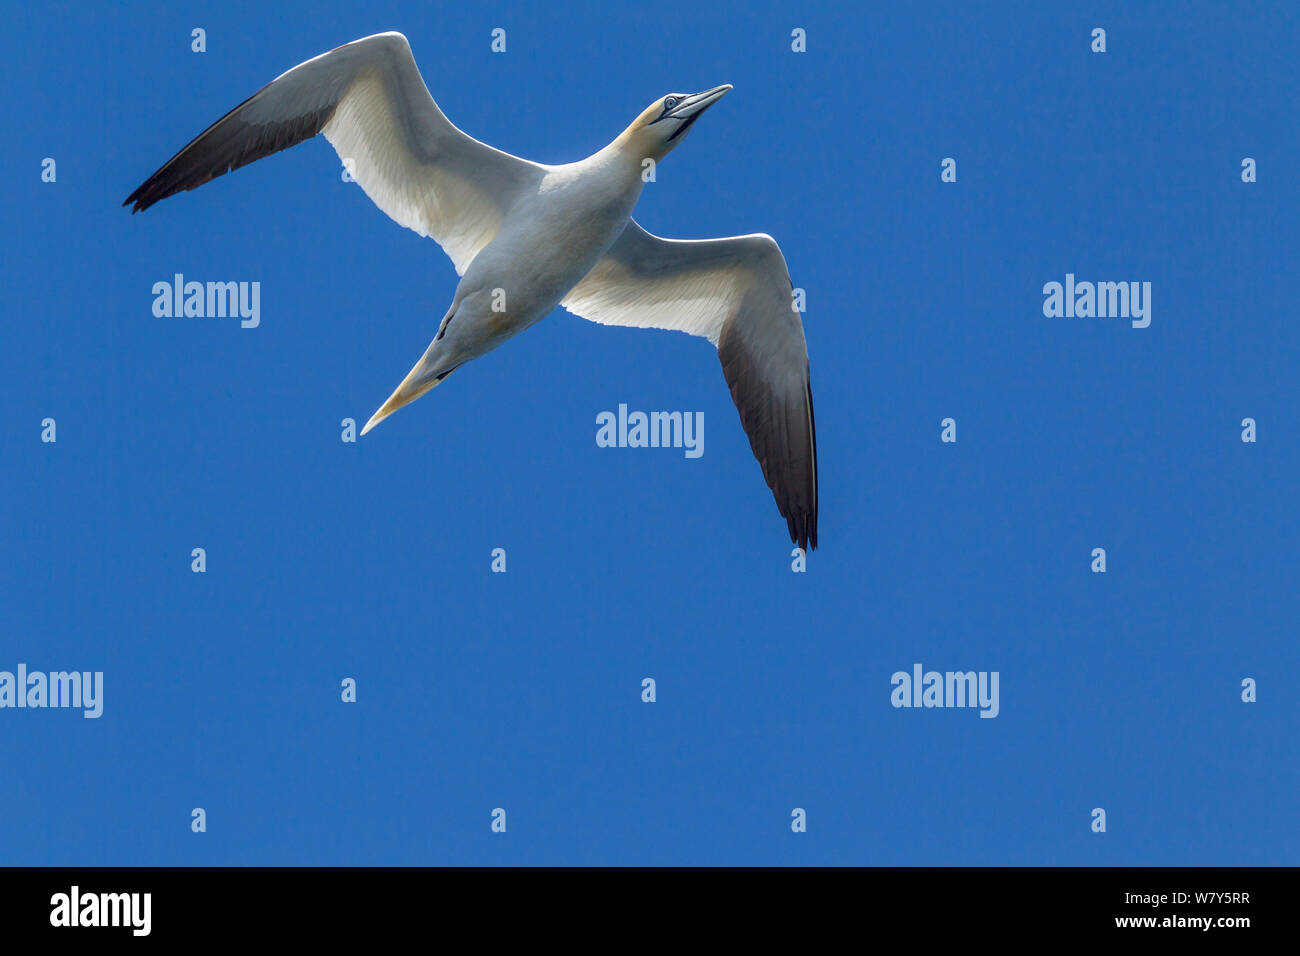 Northern gannet (Morus bassanus) in flight against a clear blue sky, Bass Rock, Firth of Forth, Scotland. July. Stock Photo